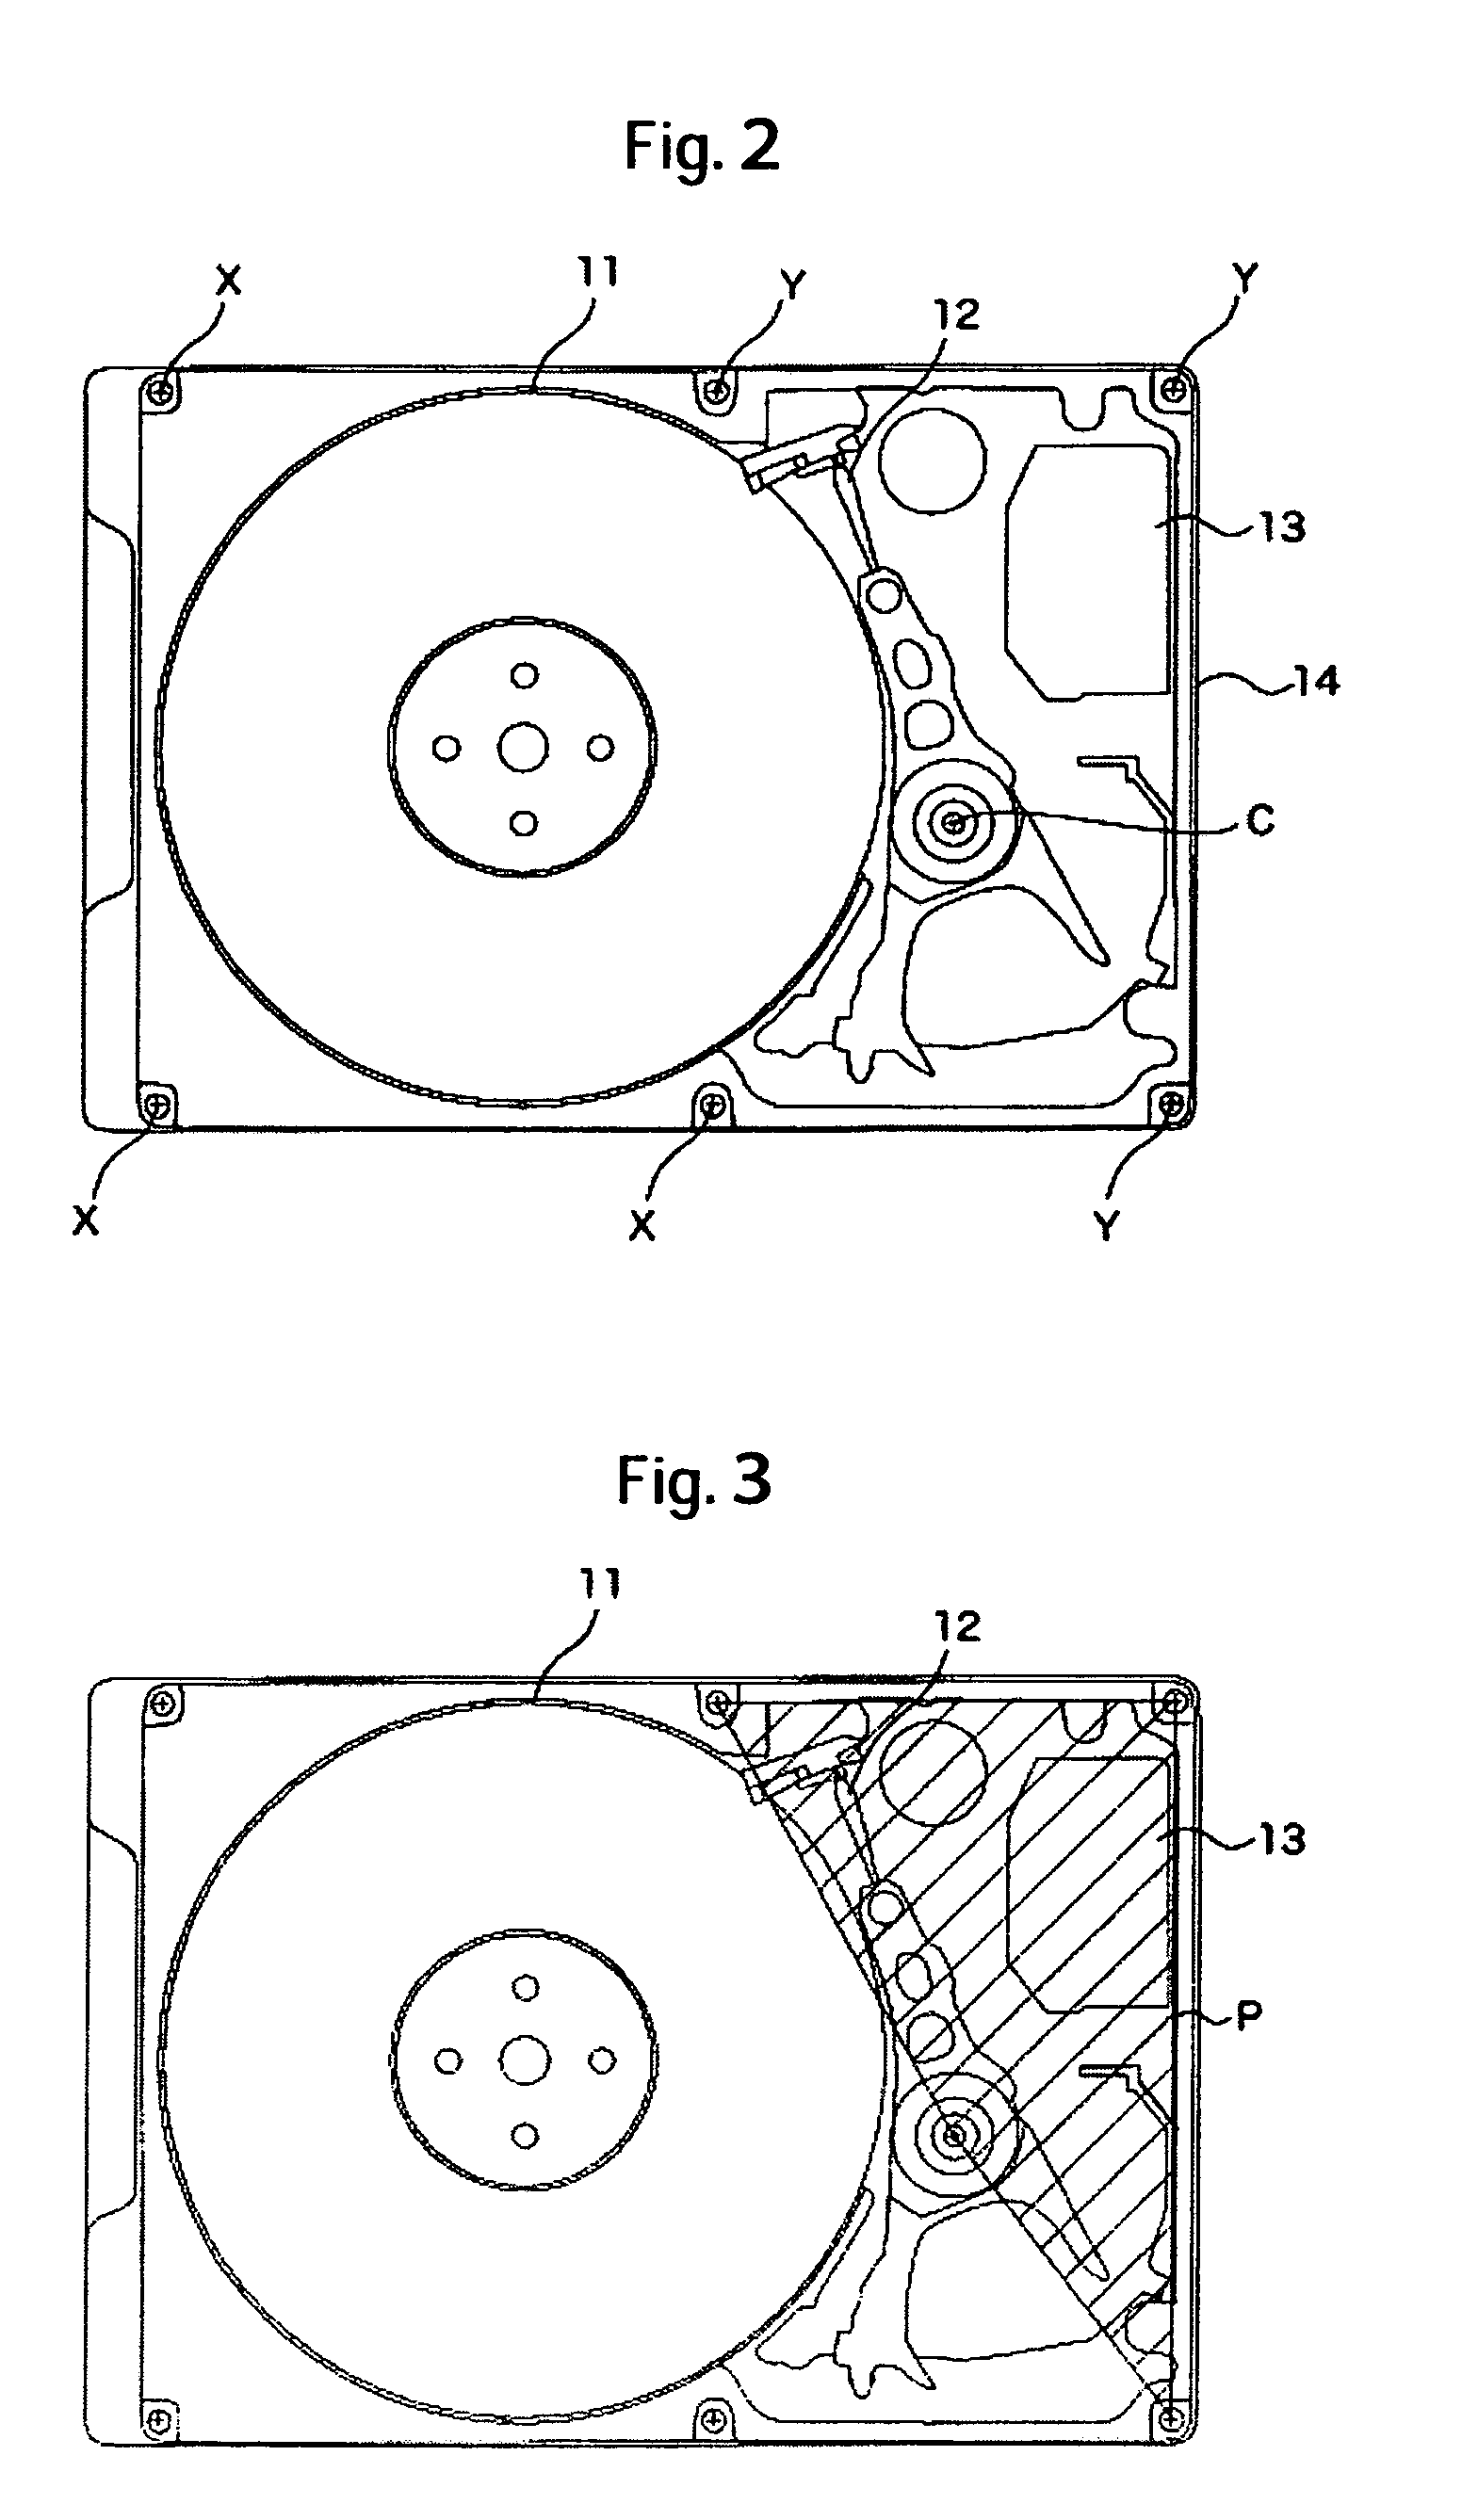 Disk drive with vibration suppression member disposed near head assembly